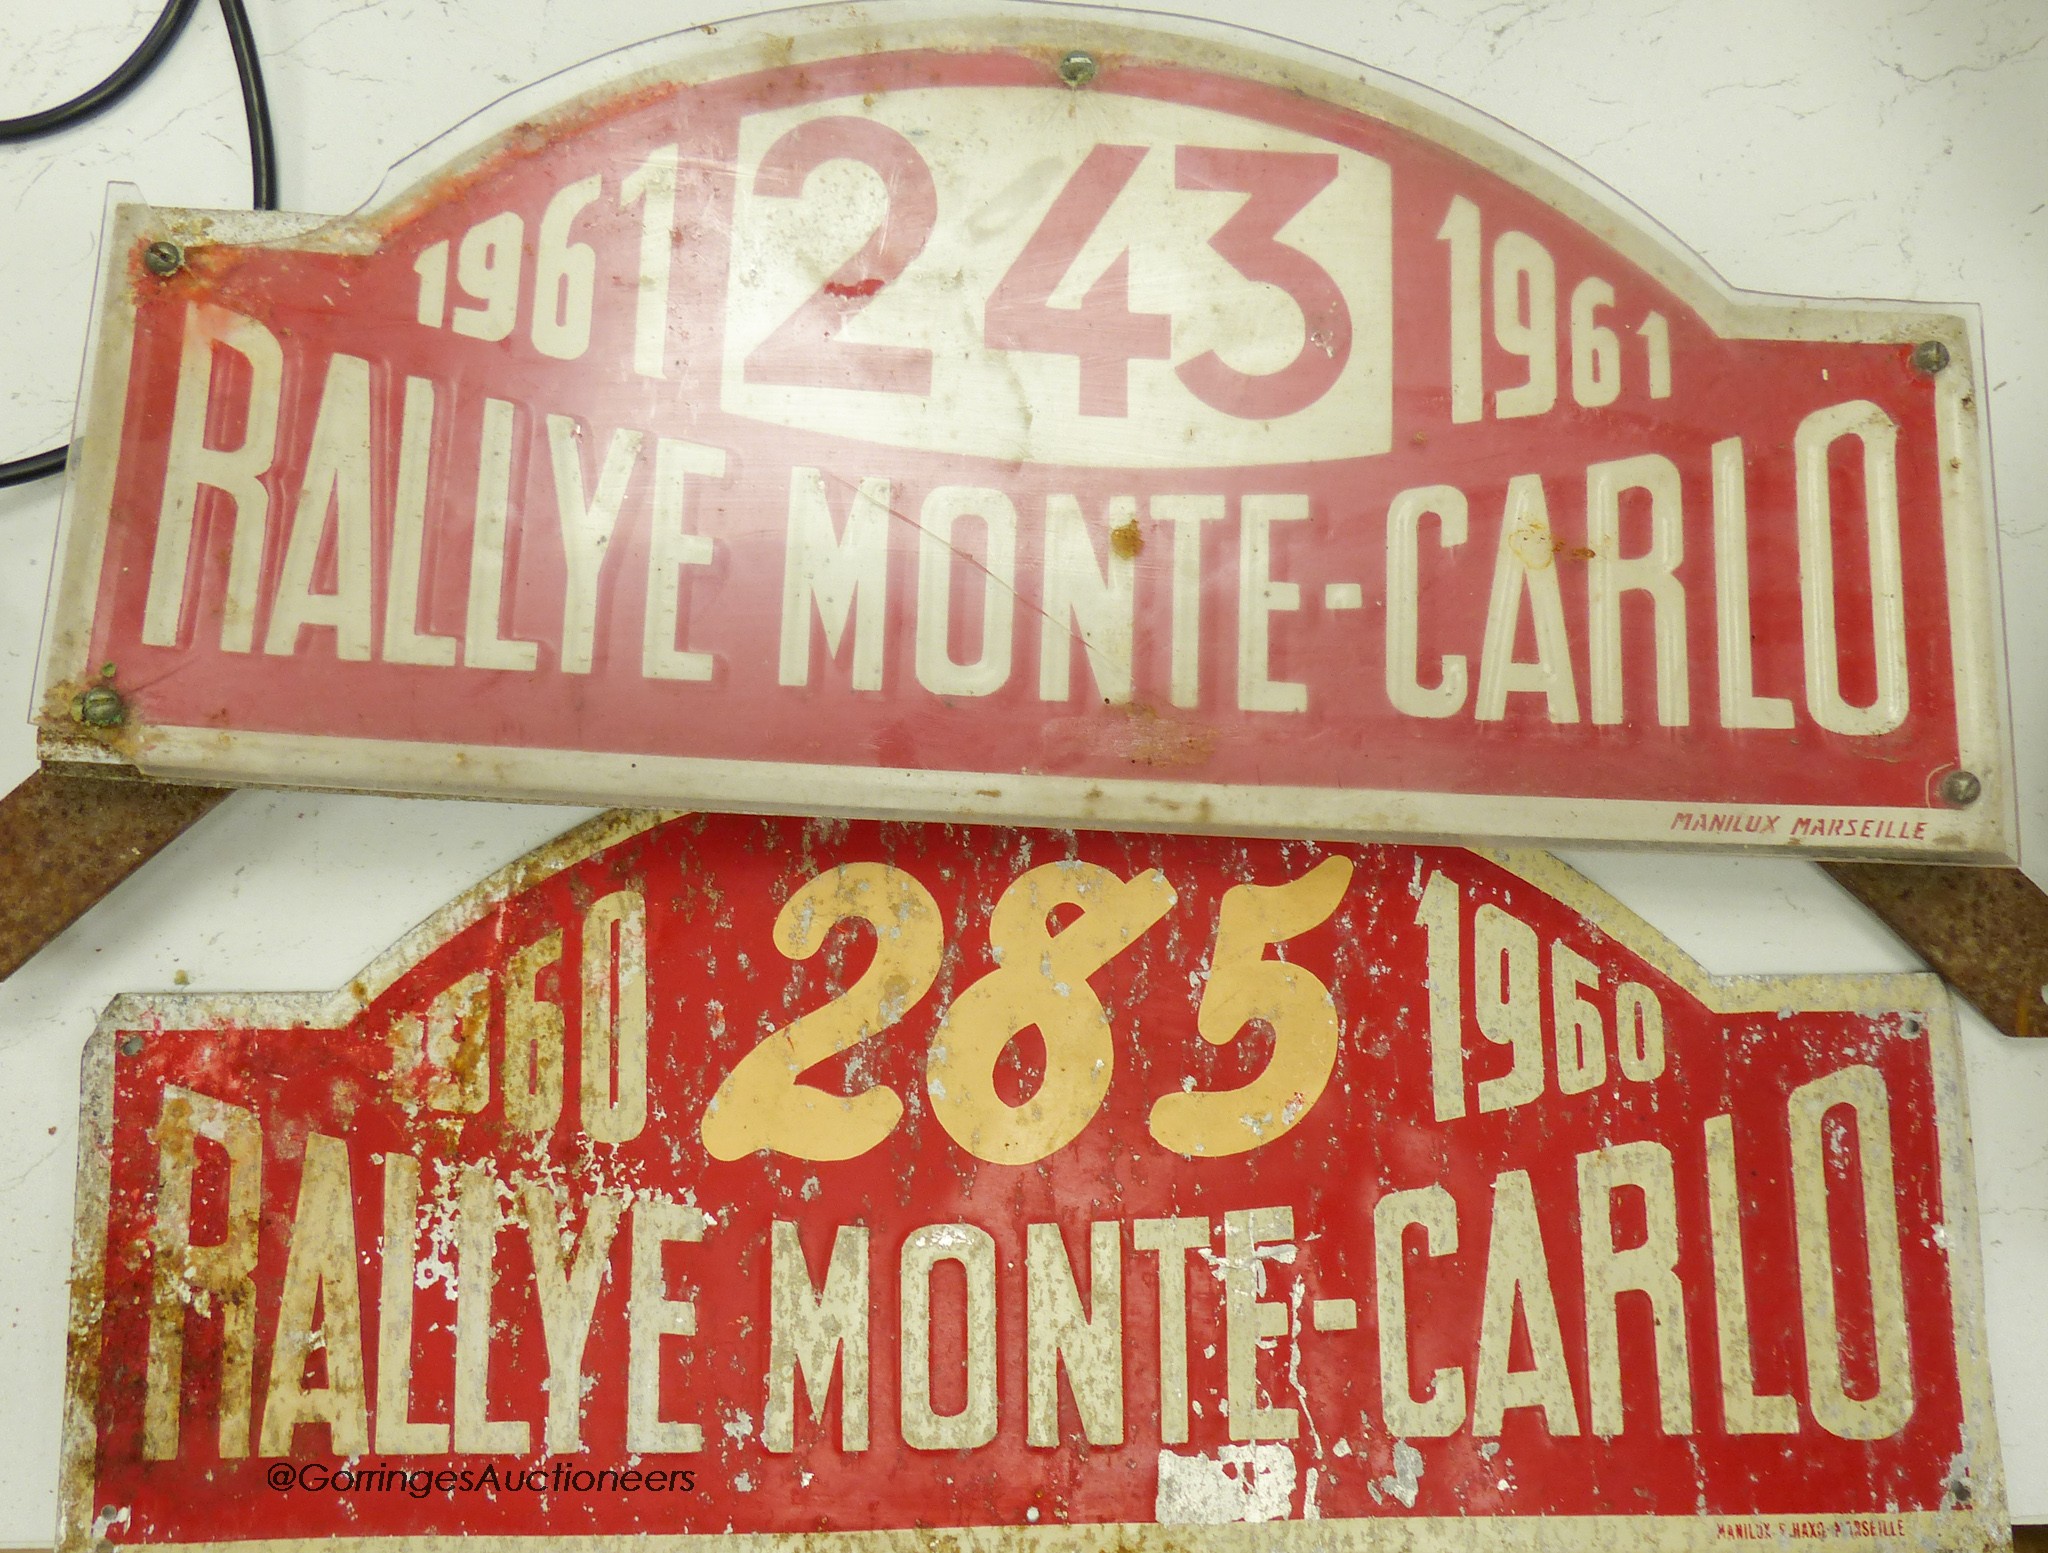 Two Rallye Monte Carlo aluminium rally number, plates, 1960 and 1961